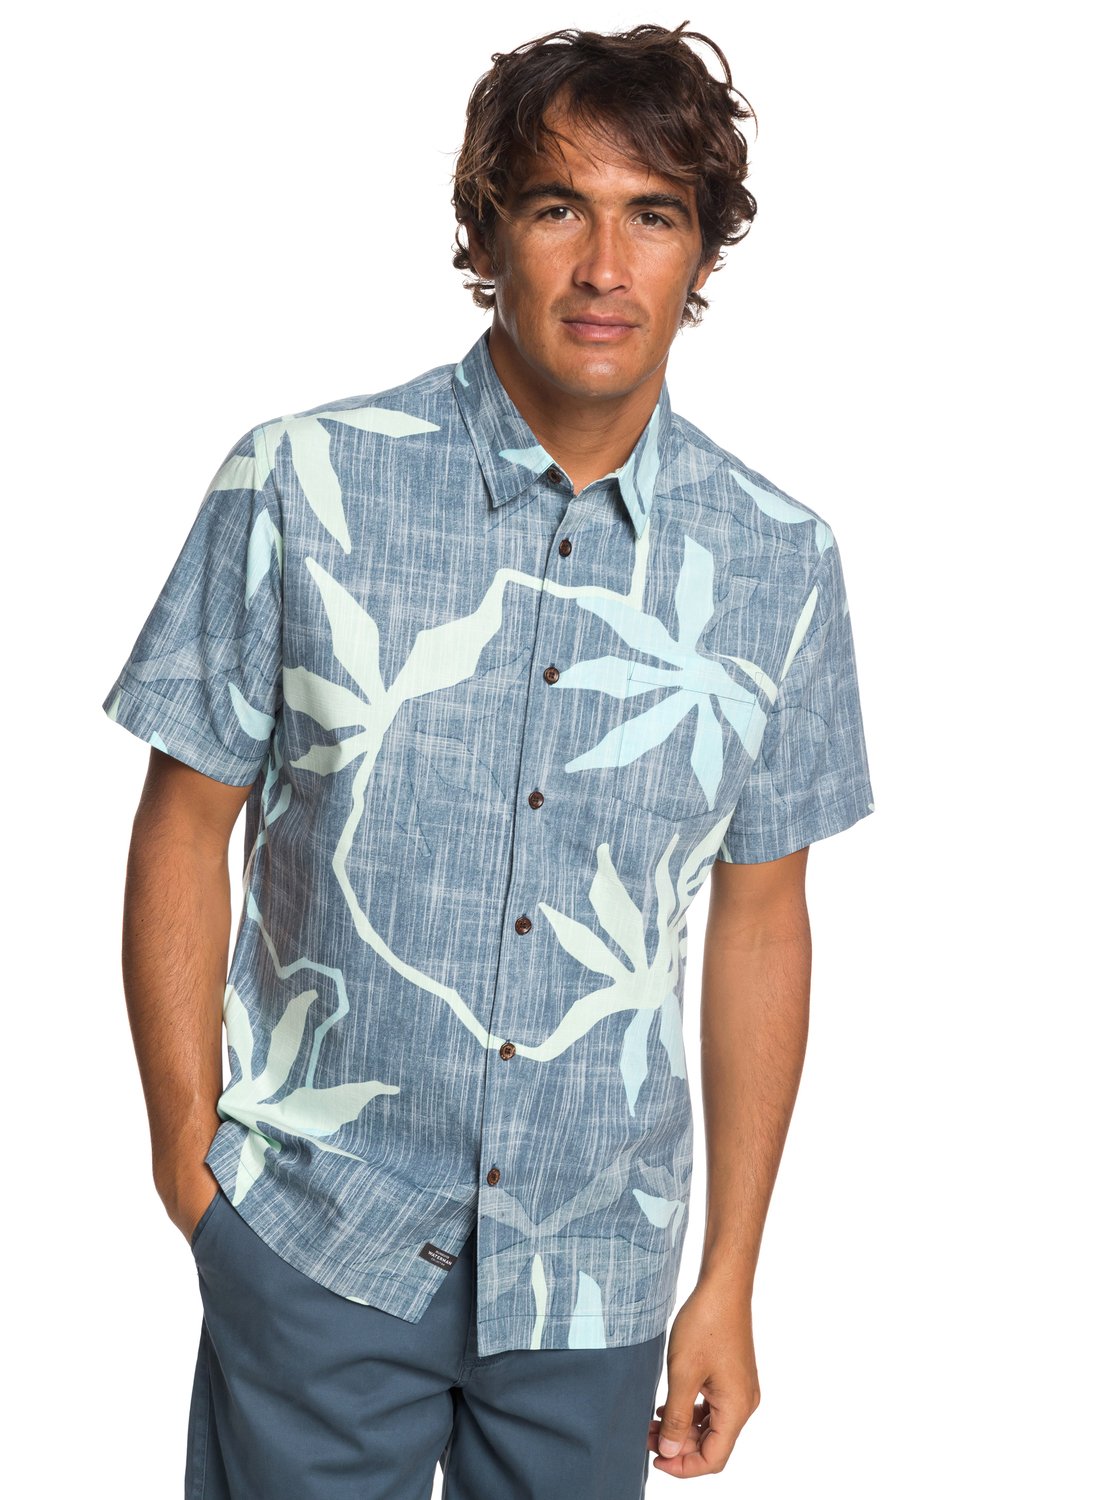 Quiksilver Waterman Gully Floral Woven BRG0 XL